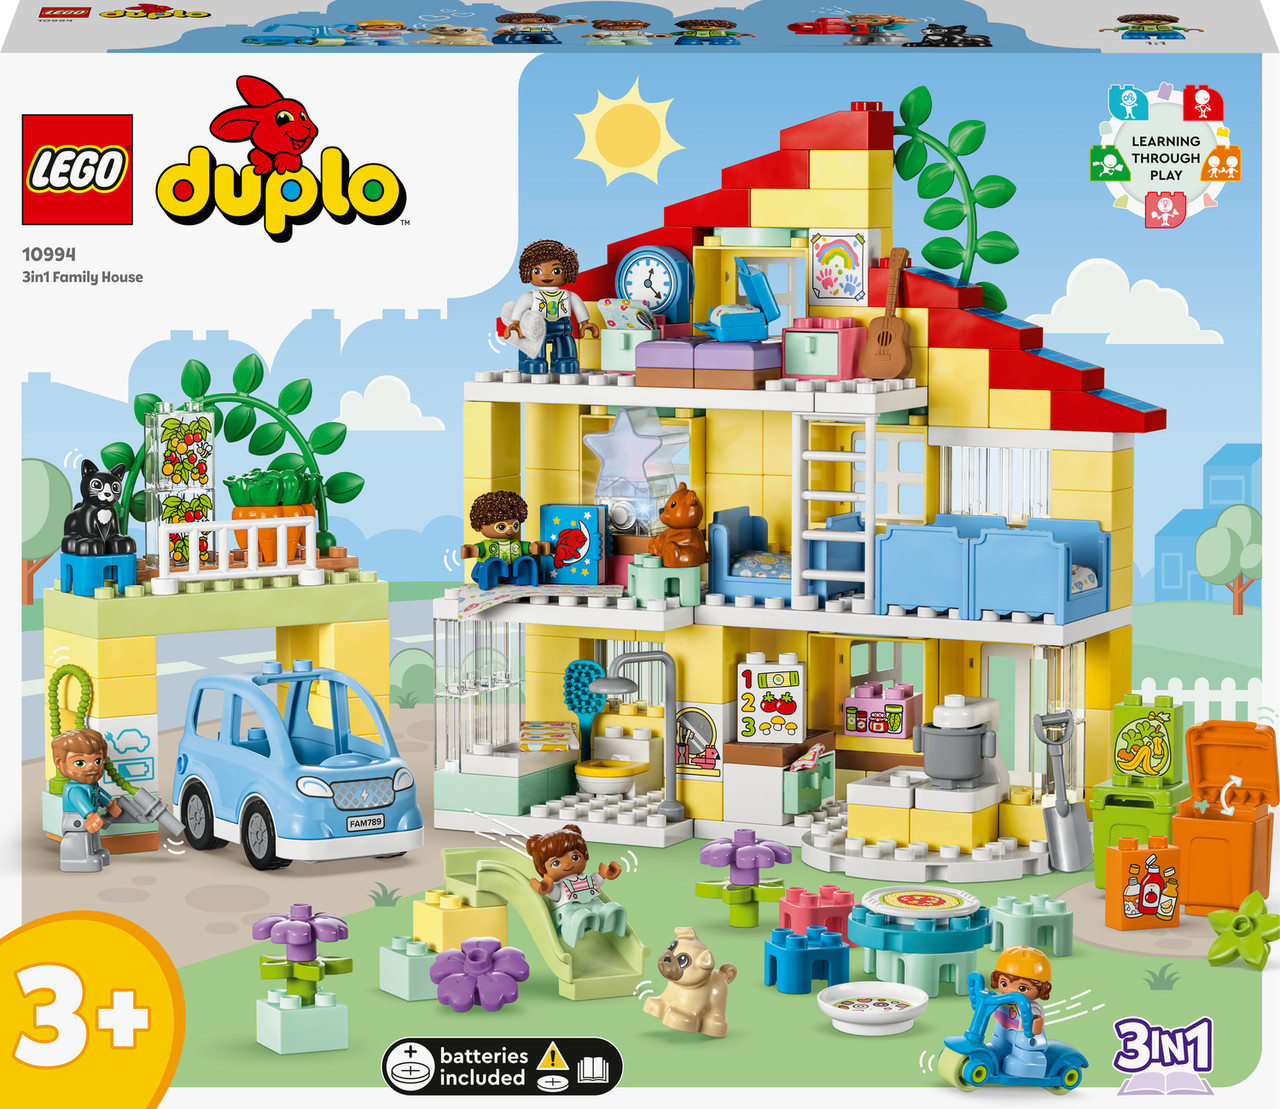 LEGO DUPLO 3 in 1 Family House Set with Toy Car 2